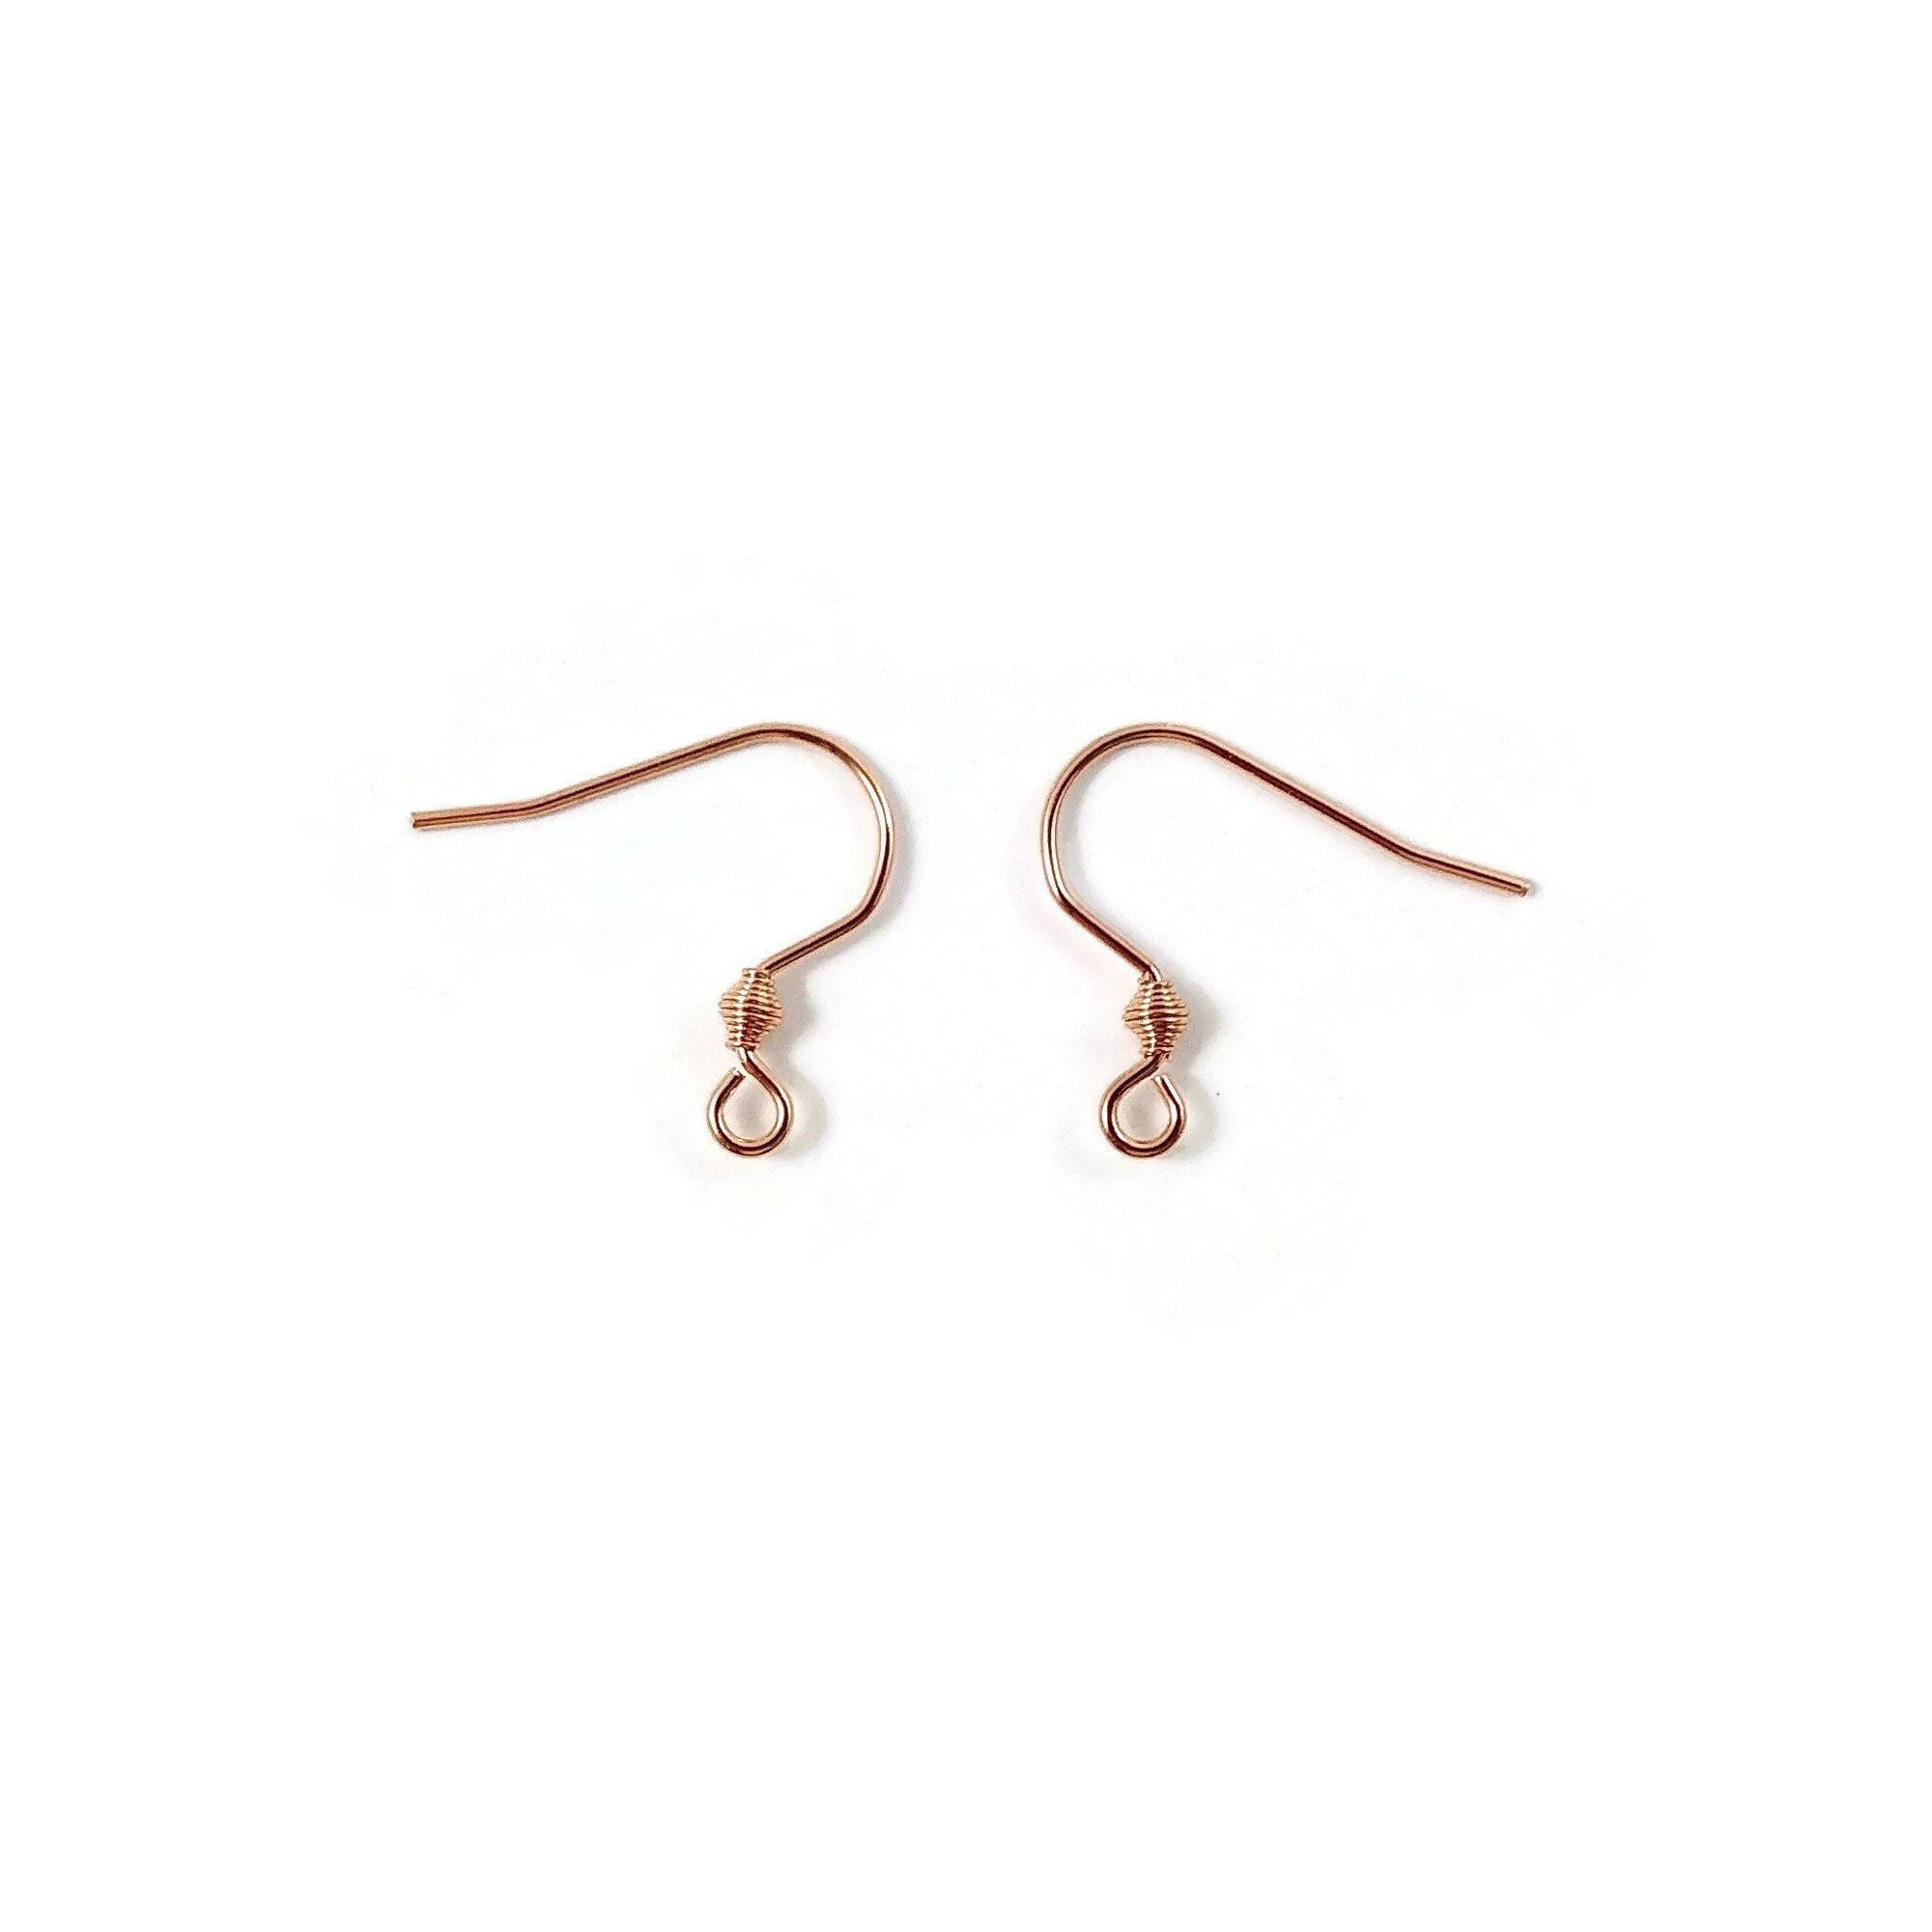  100 Pairs Rose Gold Color Earwires French Earring Hooks/Dangle Earring  Findings Jewelry Making DIY (EH-1007-RG1)